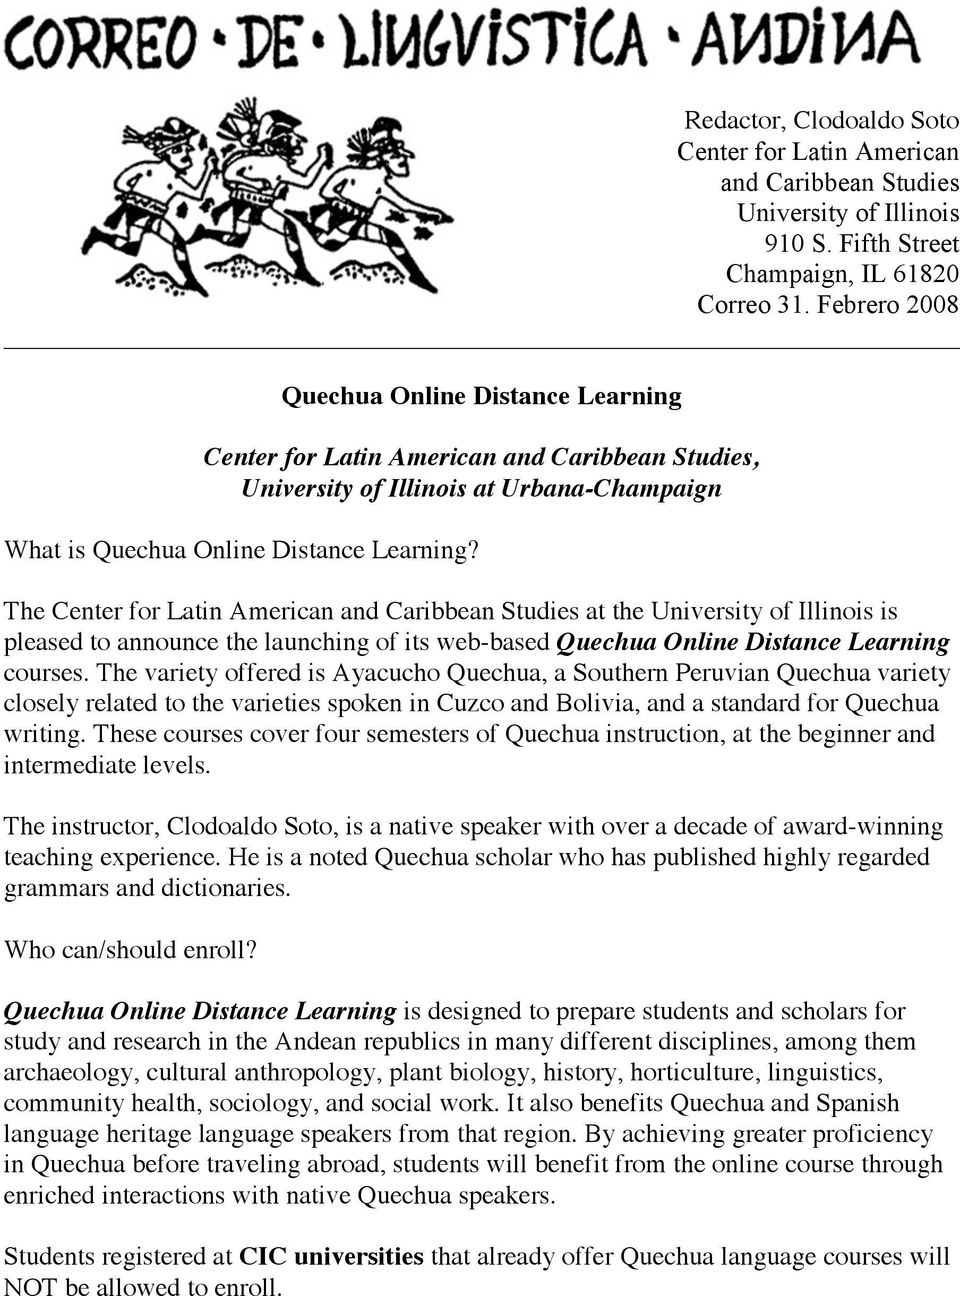 The Center for Latin American and Caribbean Studies at the University of Illinois is pleased to announce the launching of its web-based Quechua Online Distance Learning courses.